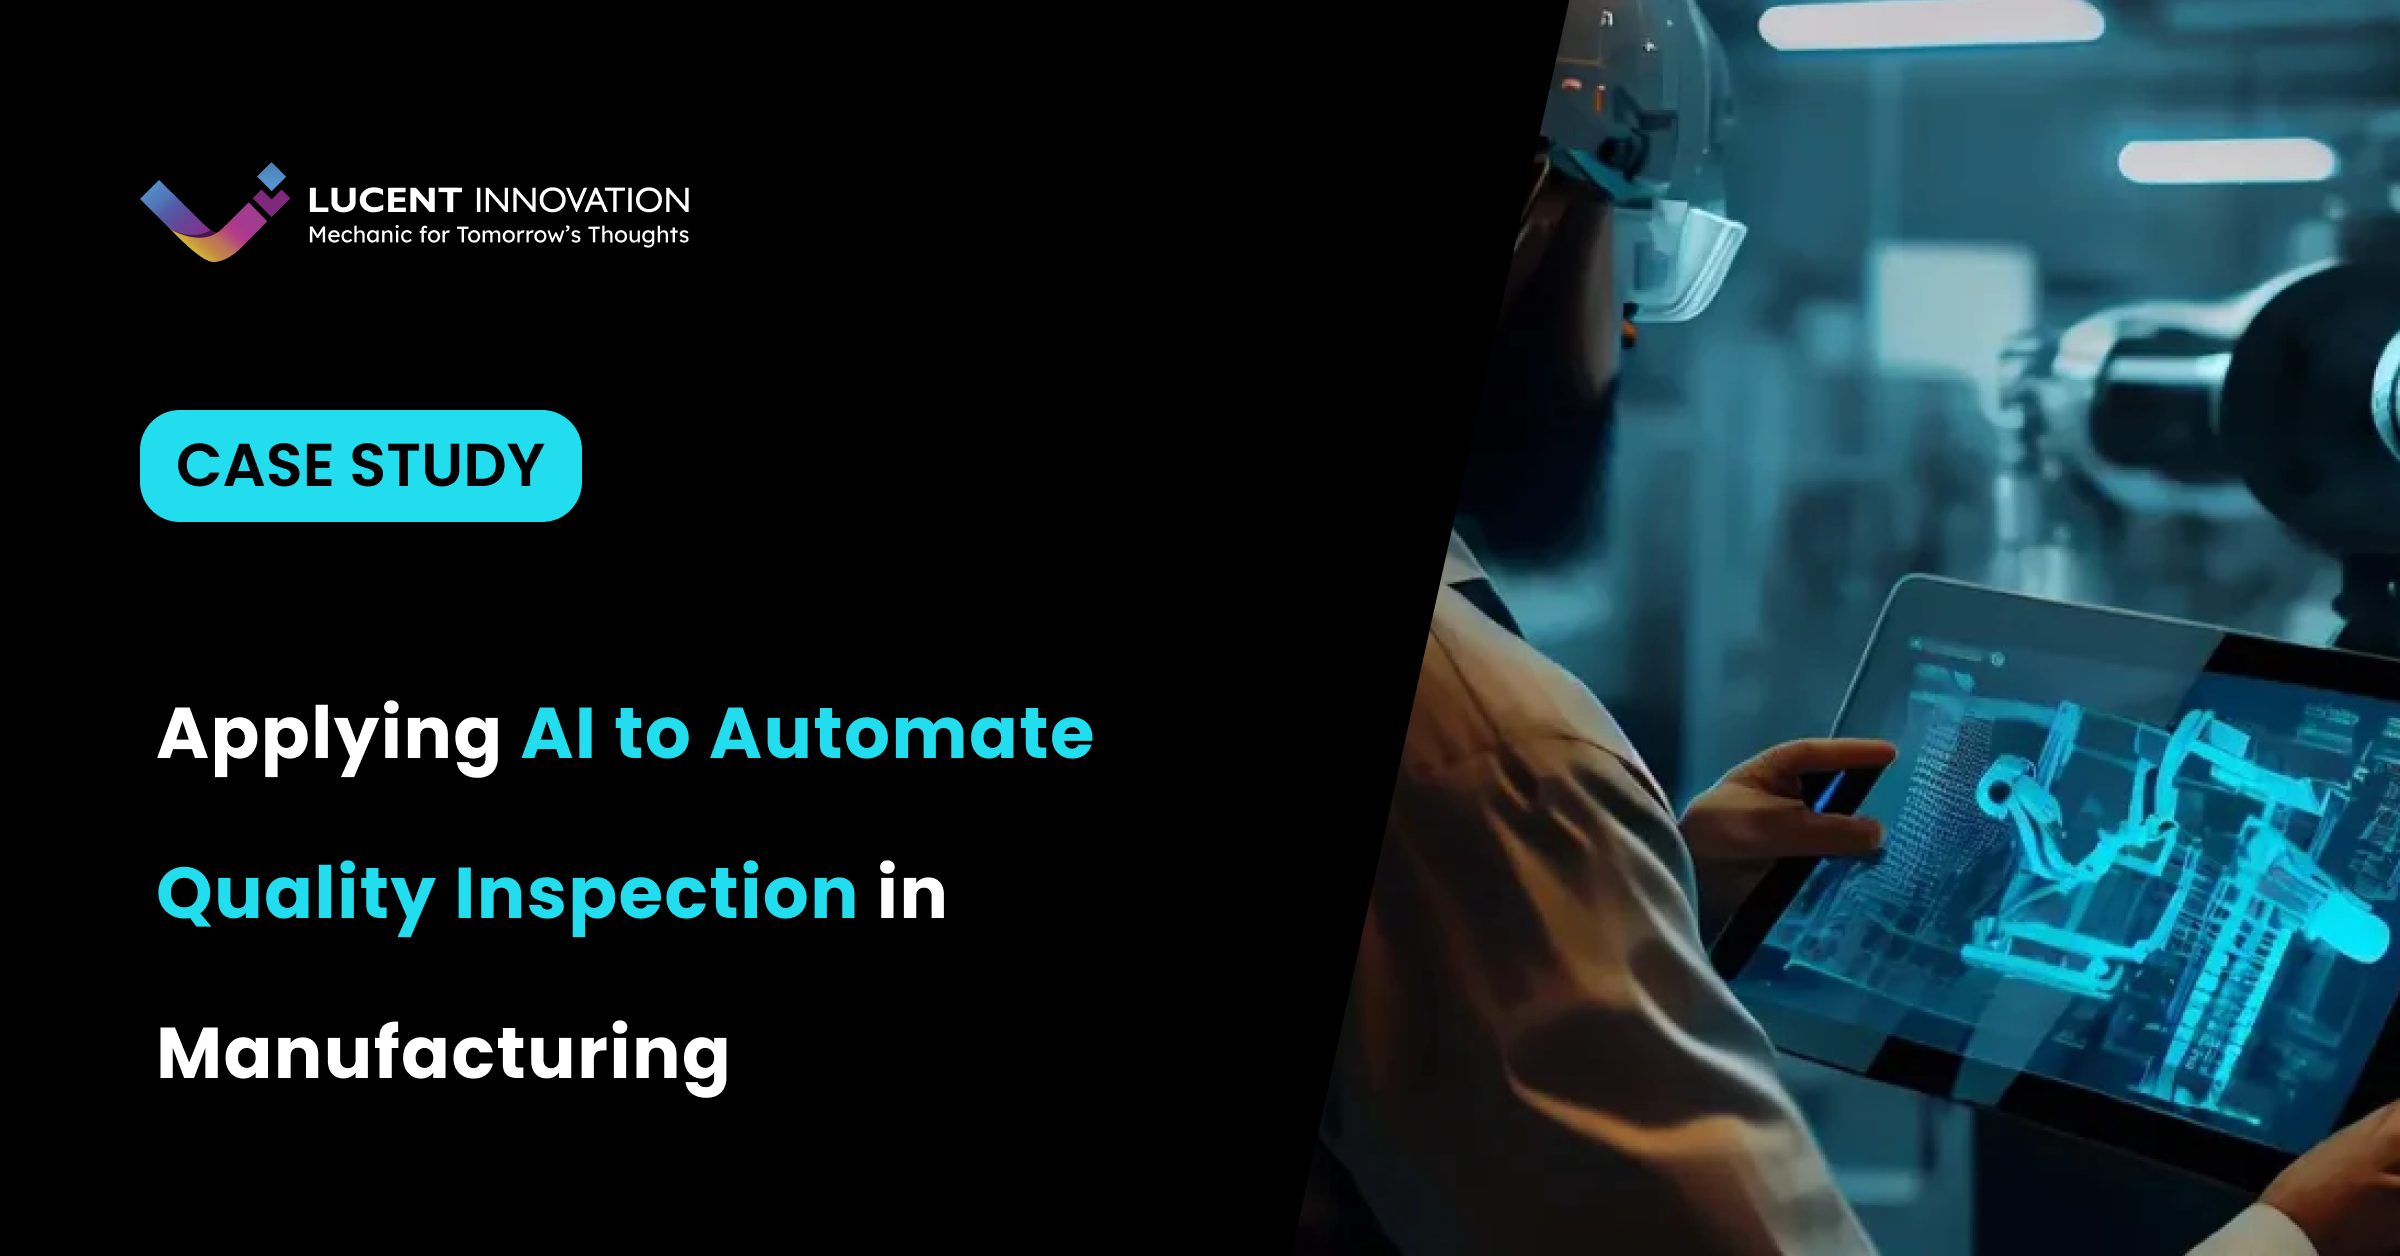 Case Study: Applying AI to Automate Quality Inspection in Manufacturing